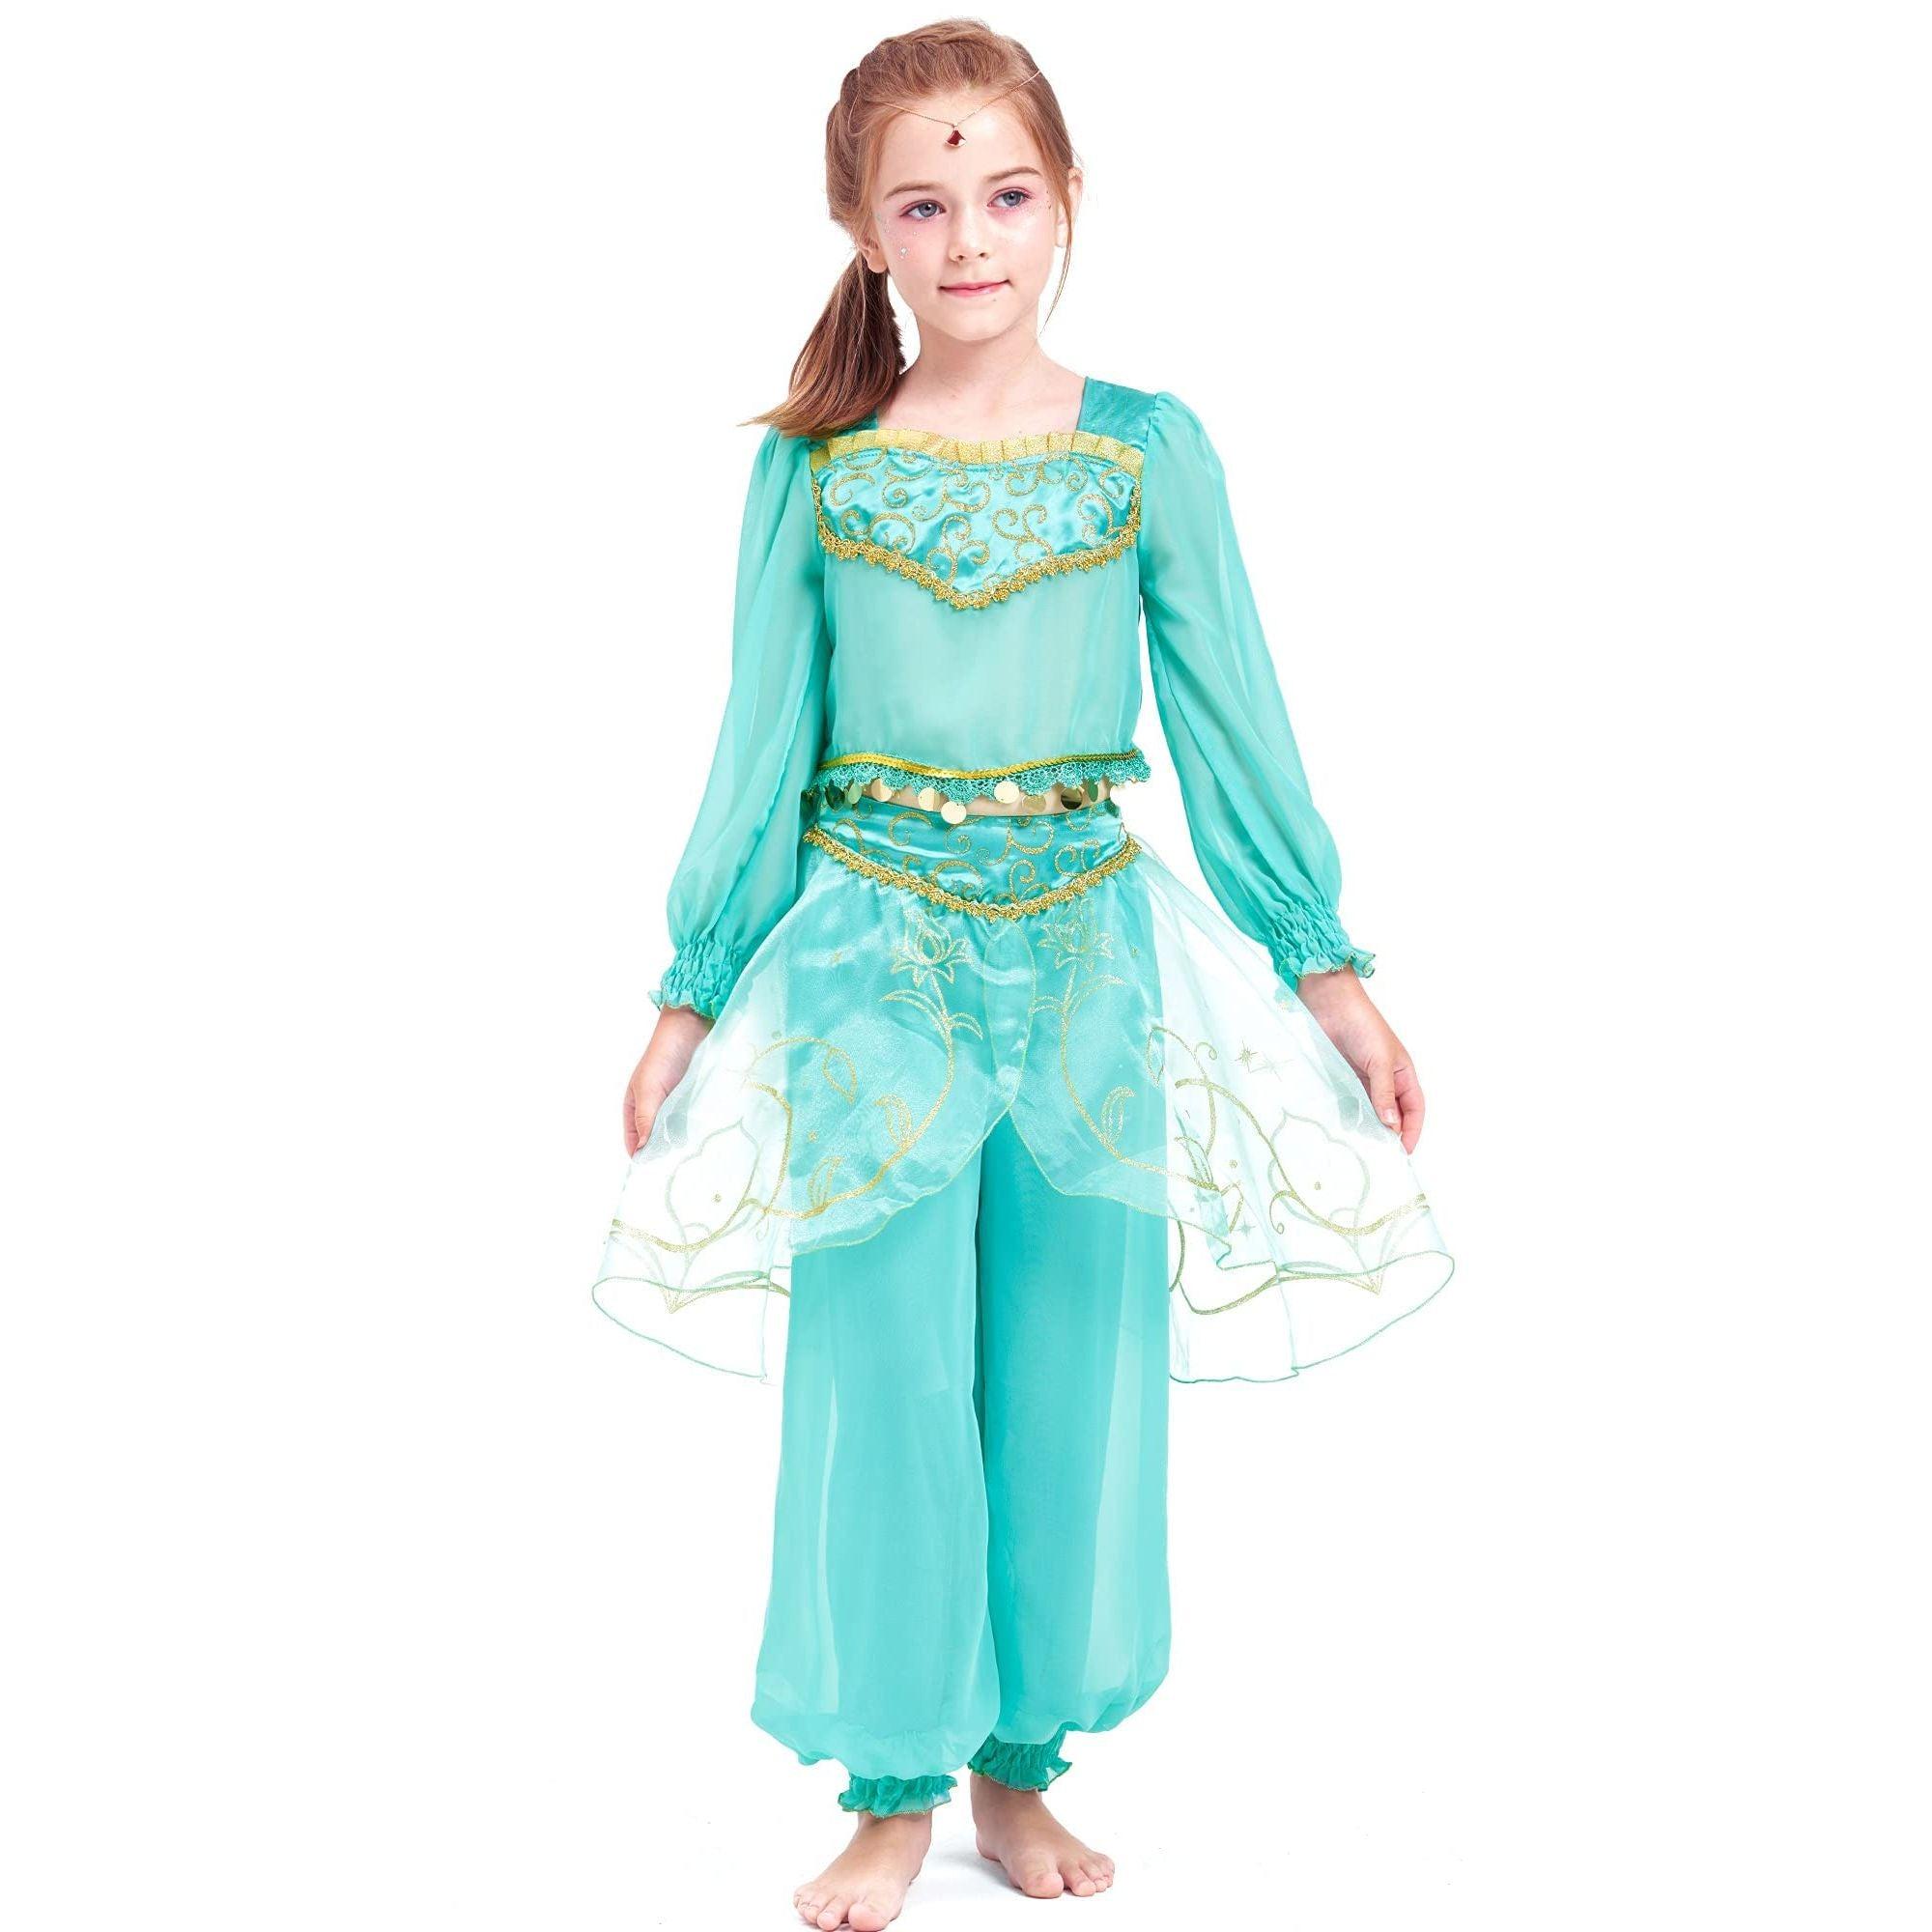 IKALI Girls Jasmine Costume Classic Princess Dress Toddler Gift Fancy Dress Up for Halloween Birthday Party 3-4Y 3